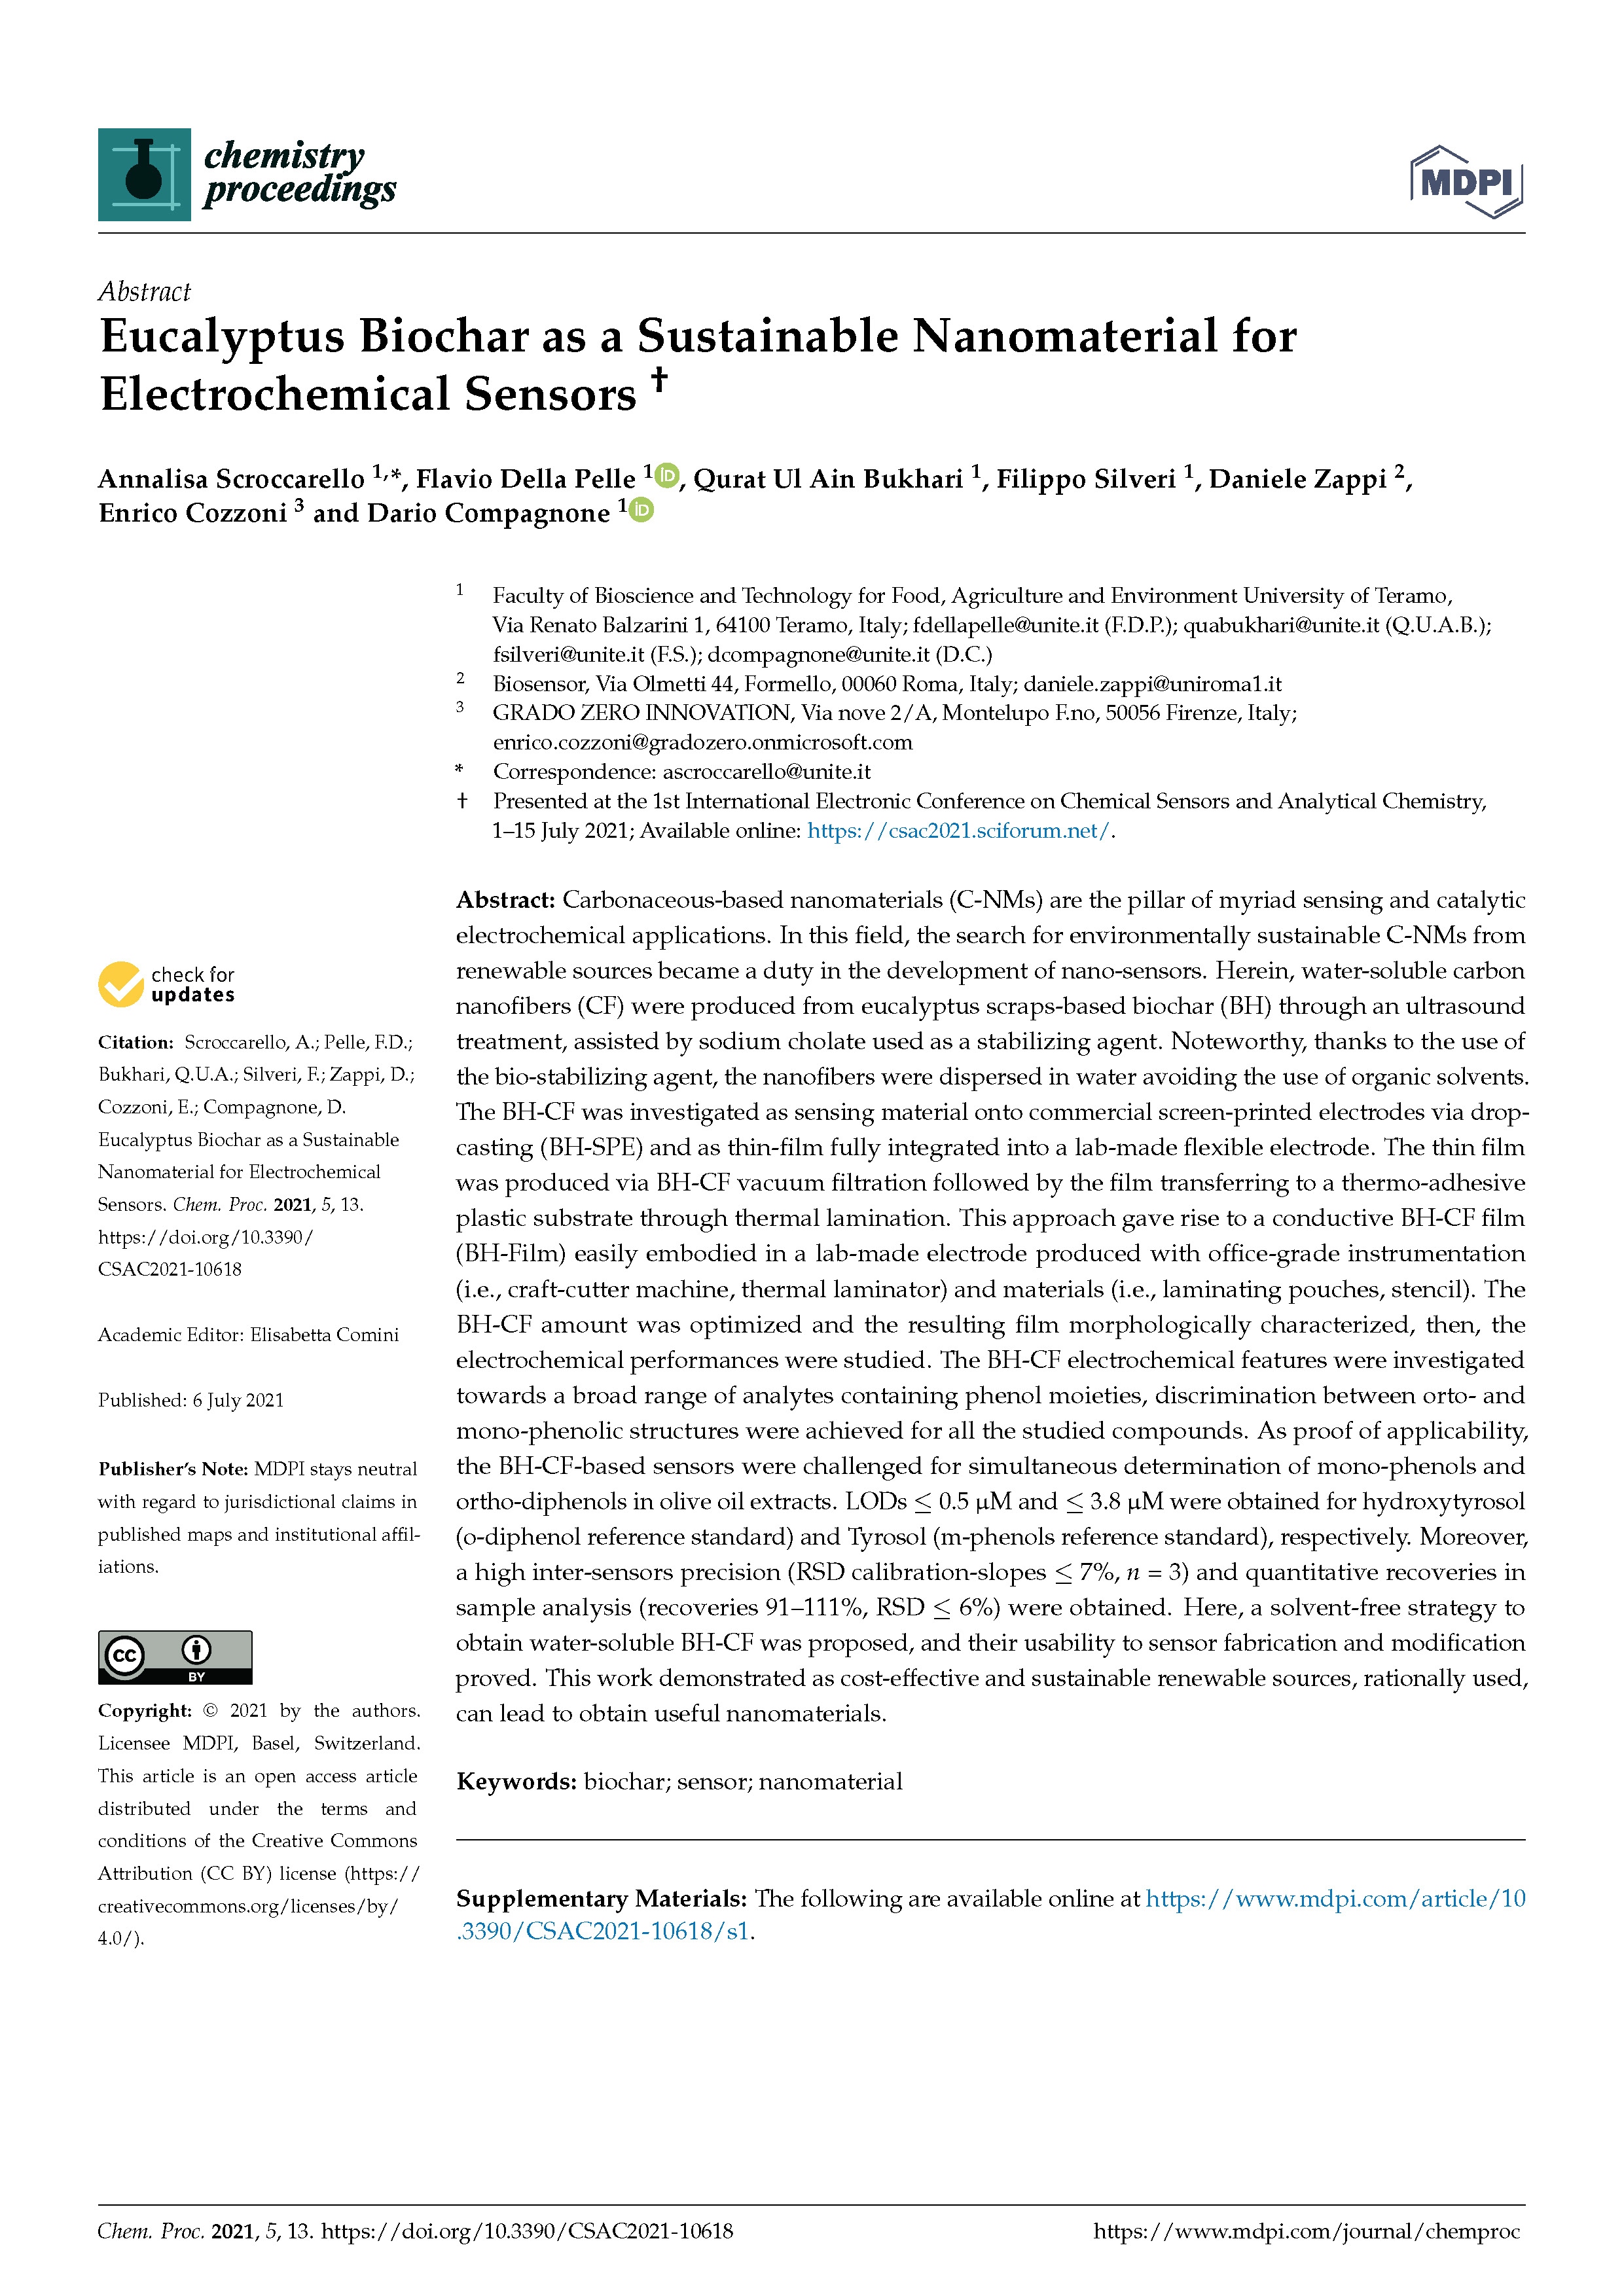 Eucalyptus Biochar as a Sustainable Nanomaterial for Electrochemical Sensors  Image